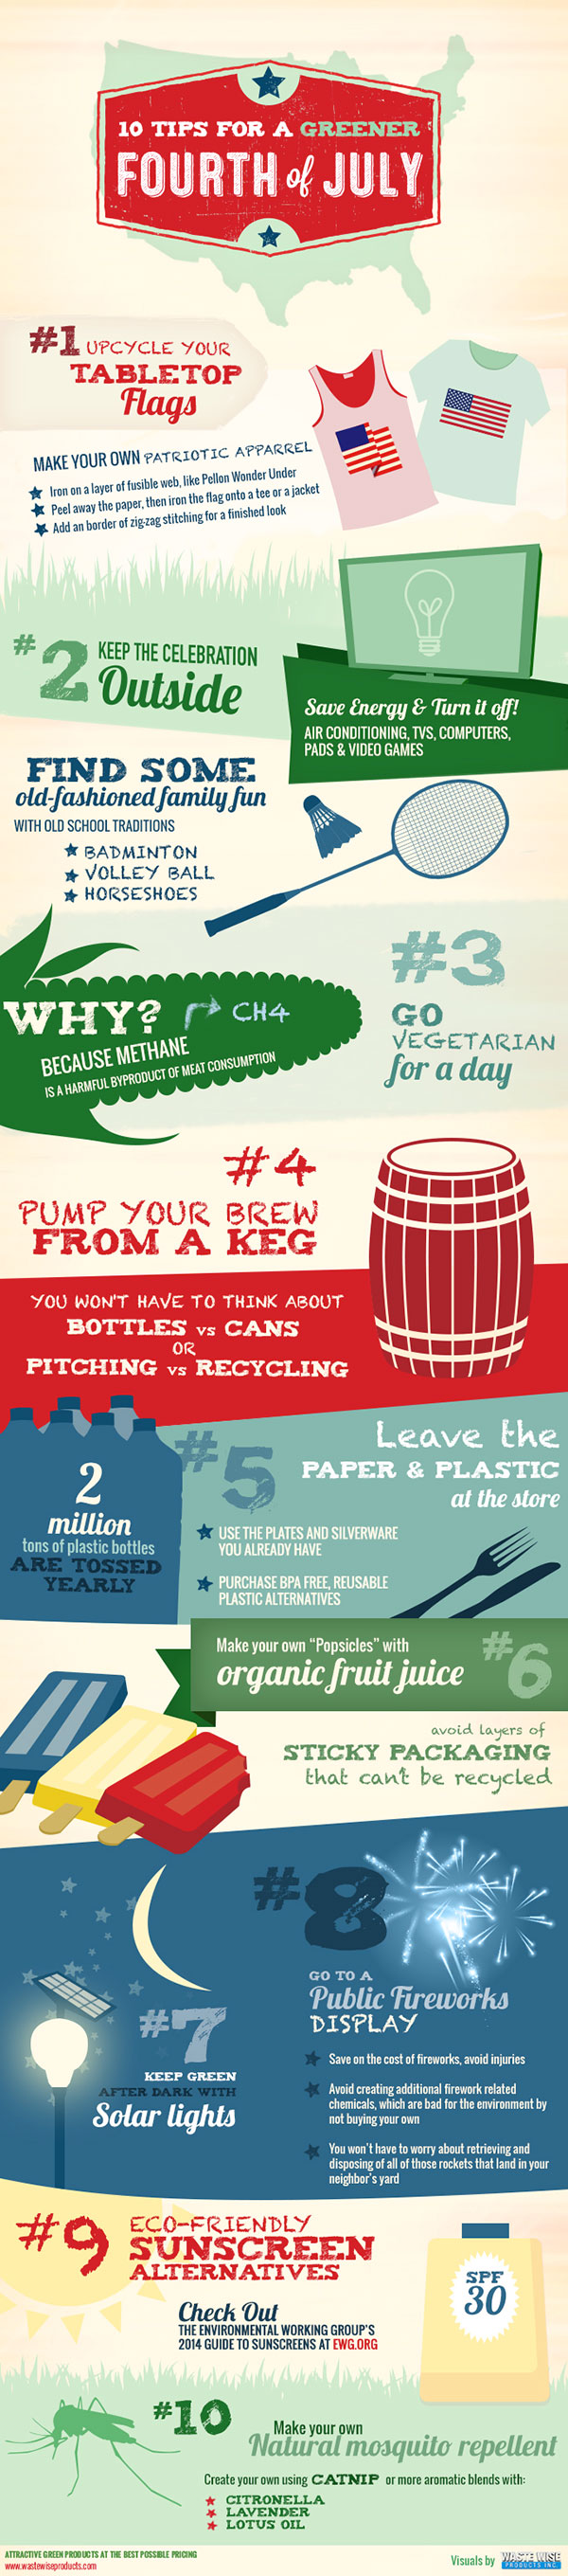 10 Tips for a Greener 4th of July - Infographic 2014